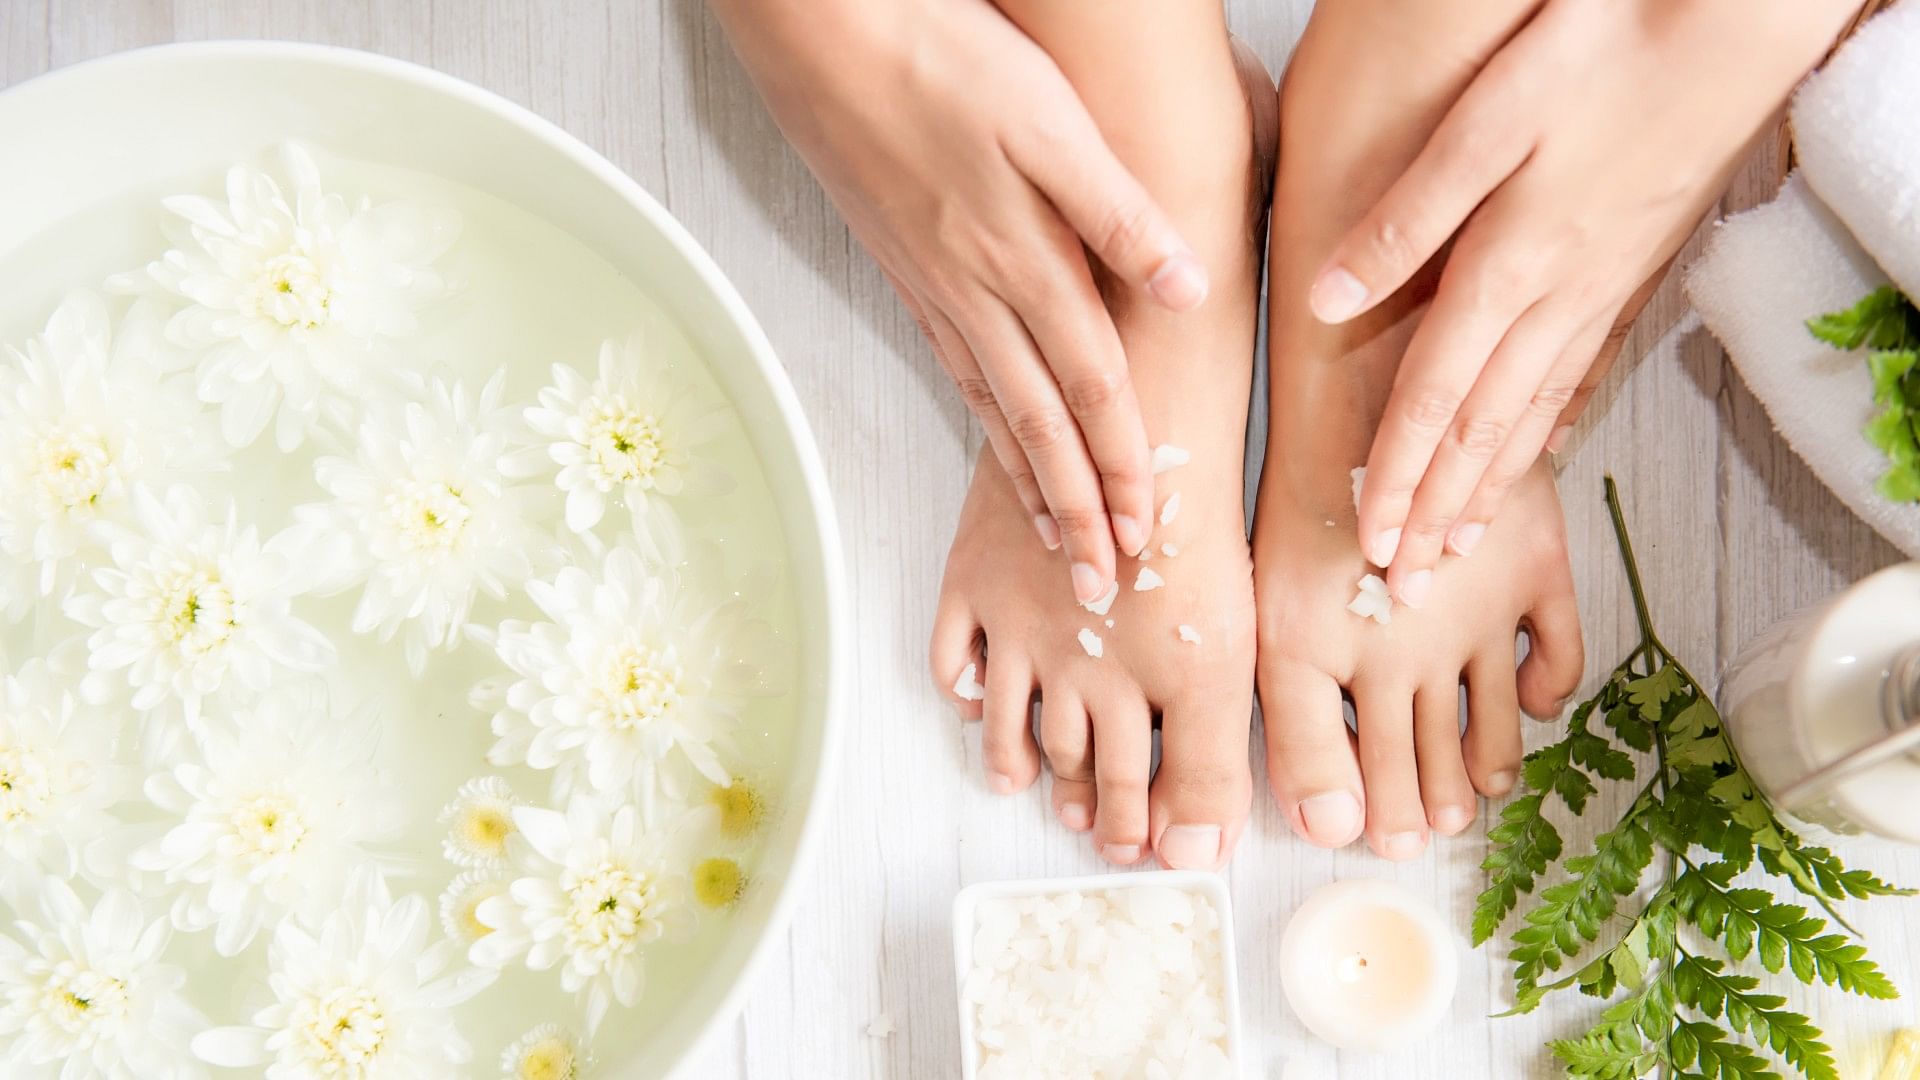 Pedicure at home steps Home remedies for cleaning dirty feet at home